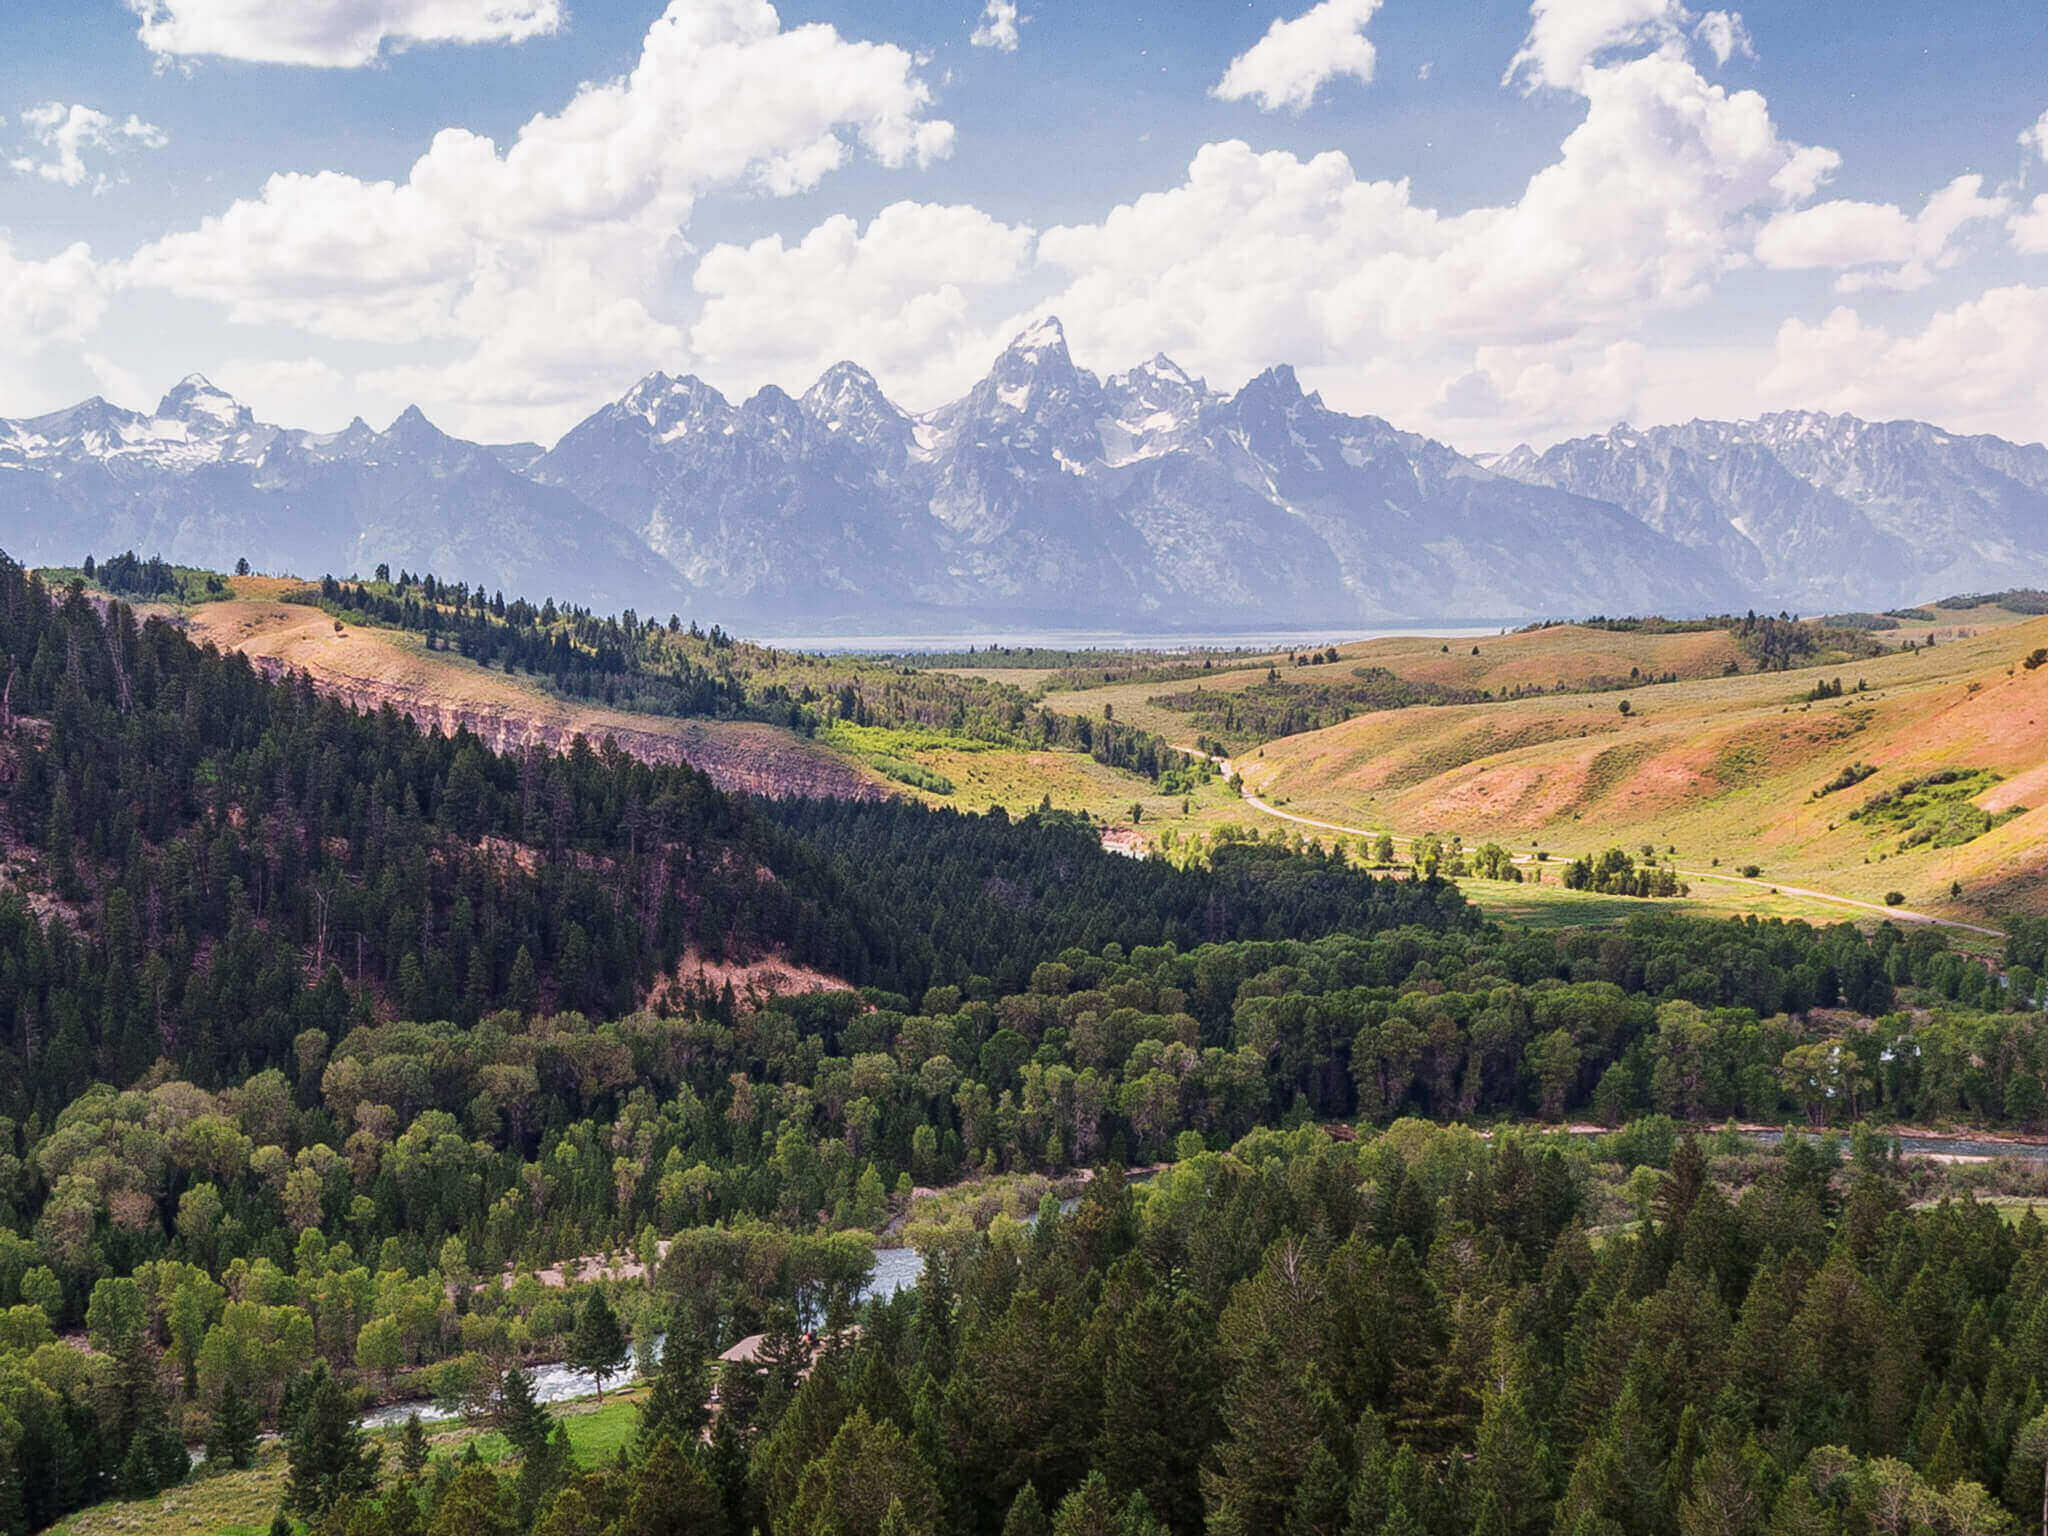 An overhead view of the sprawling forests and snow-capped mountains in the distance at Grand Teton National Park.